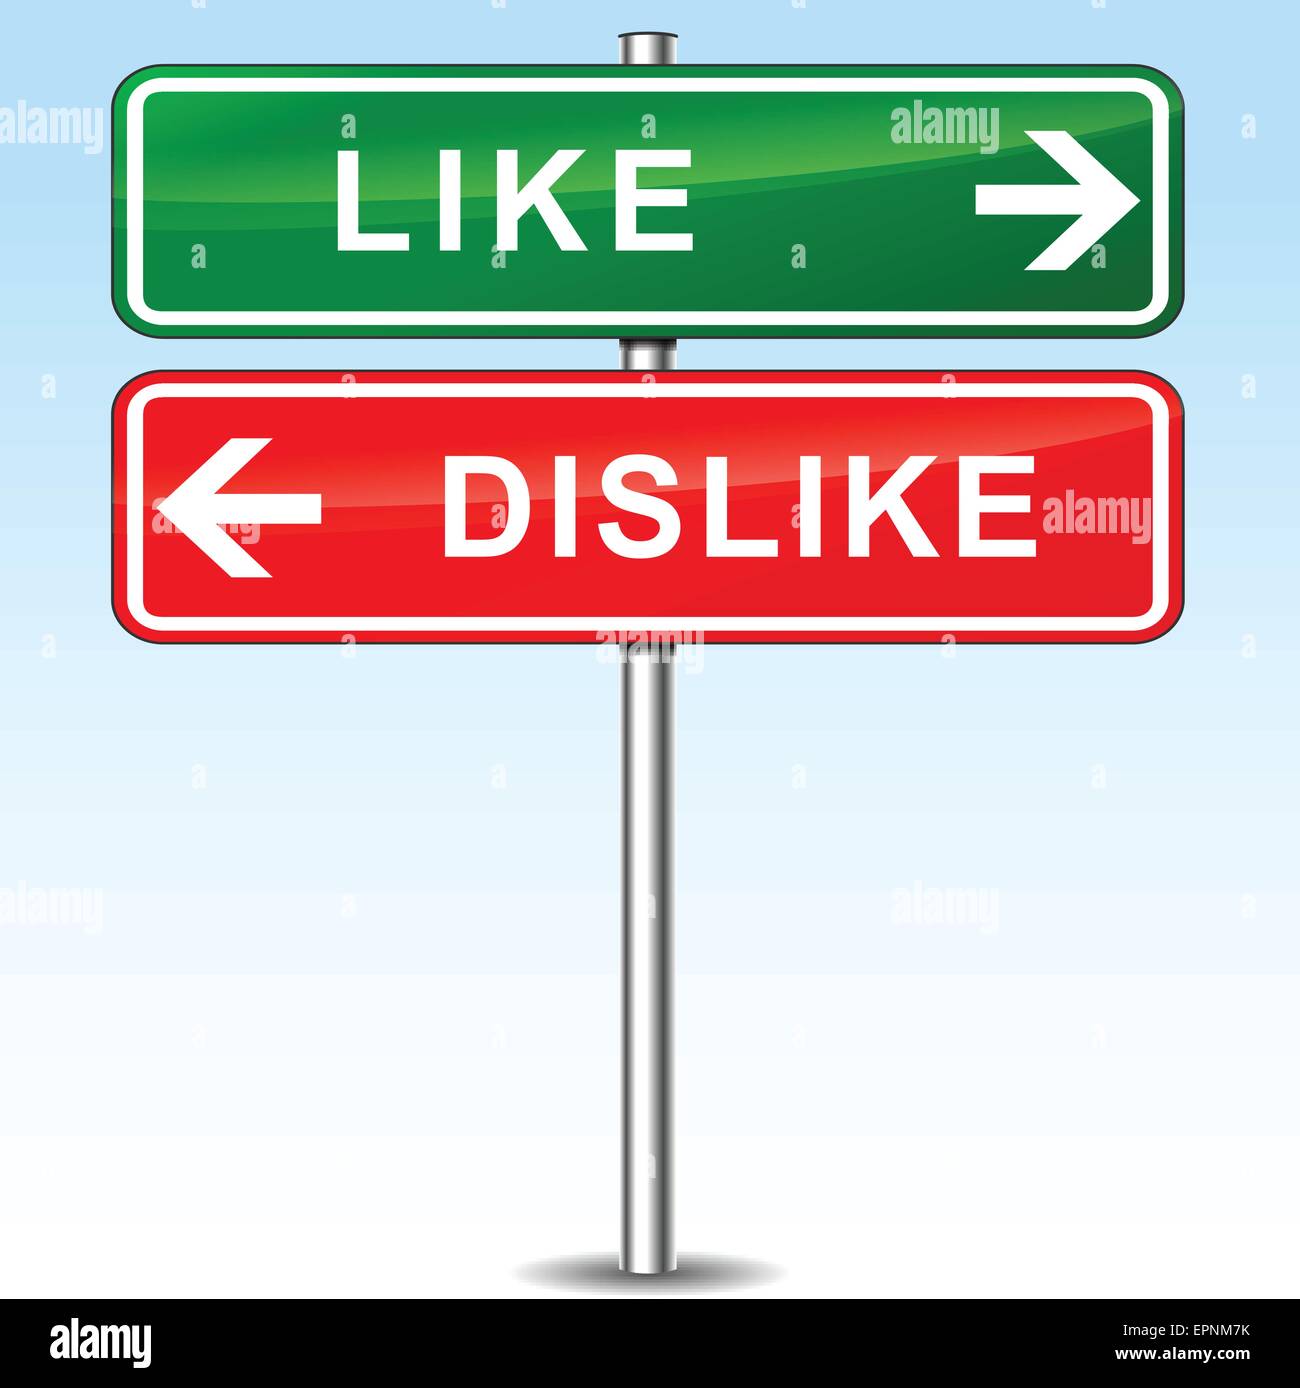 illustration of green and red direction signs for like and dislike Stock Vector